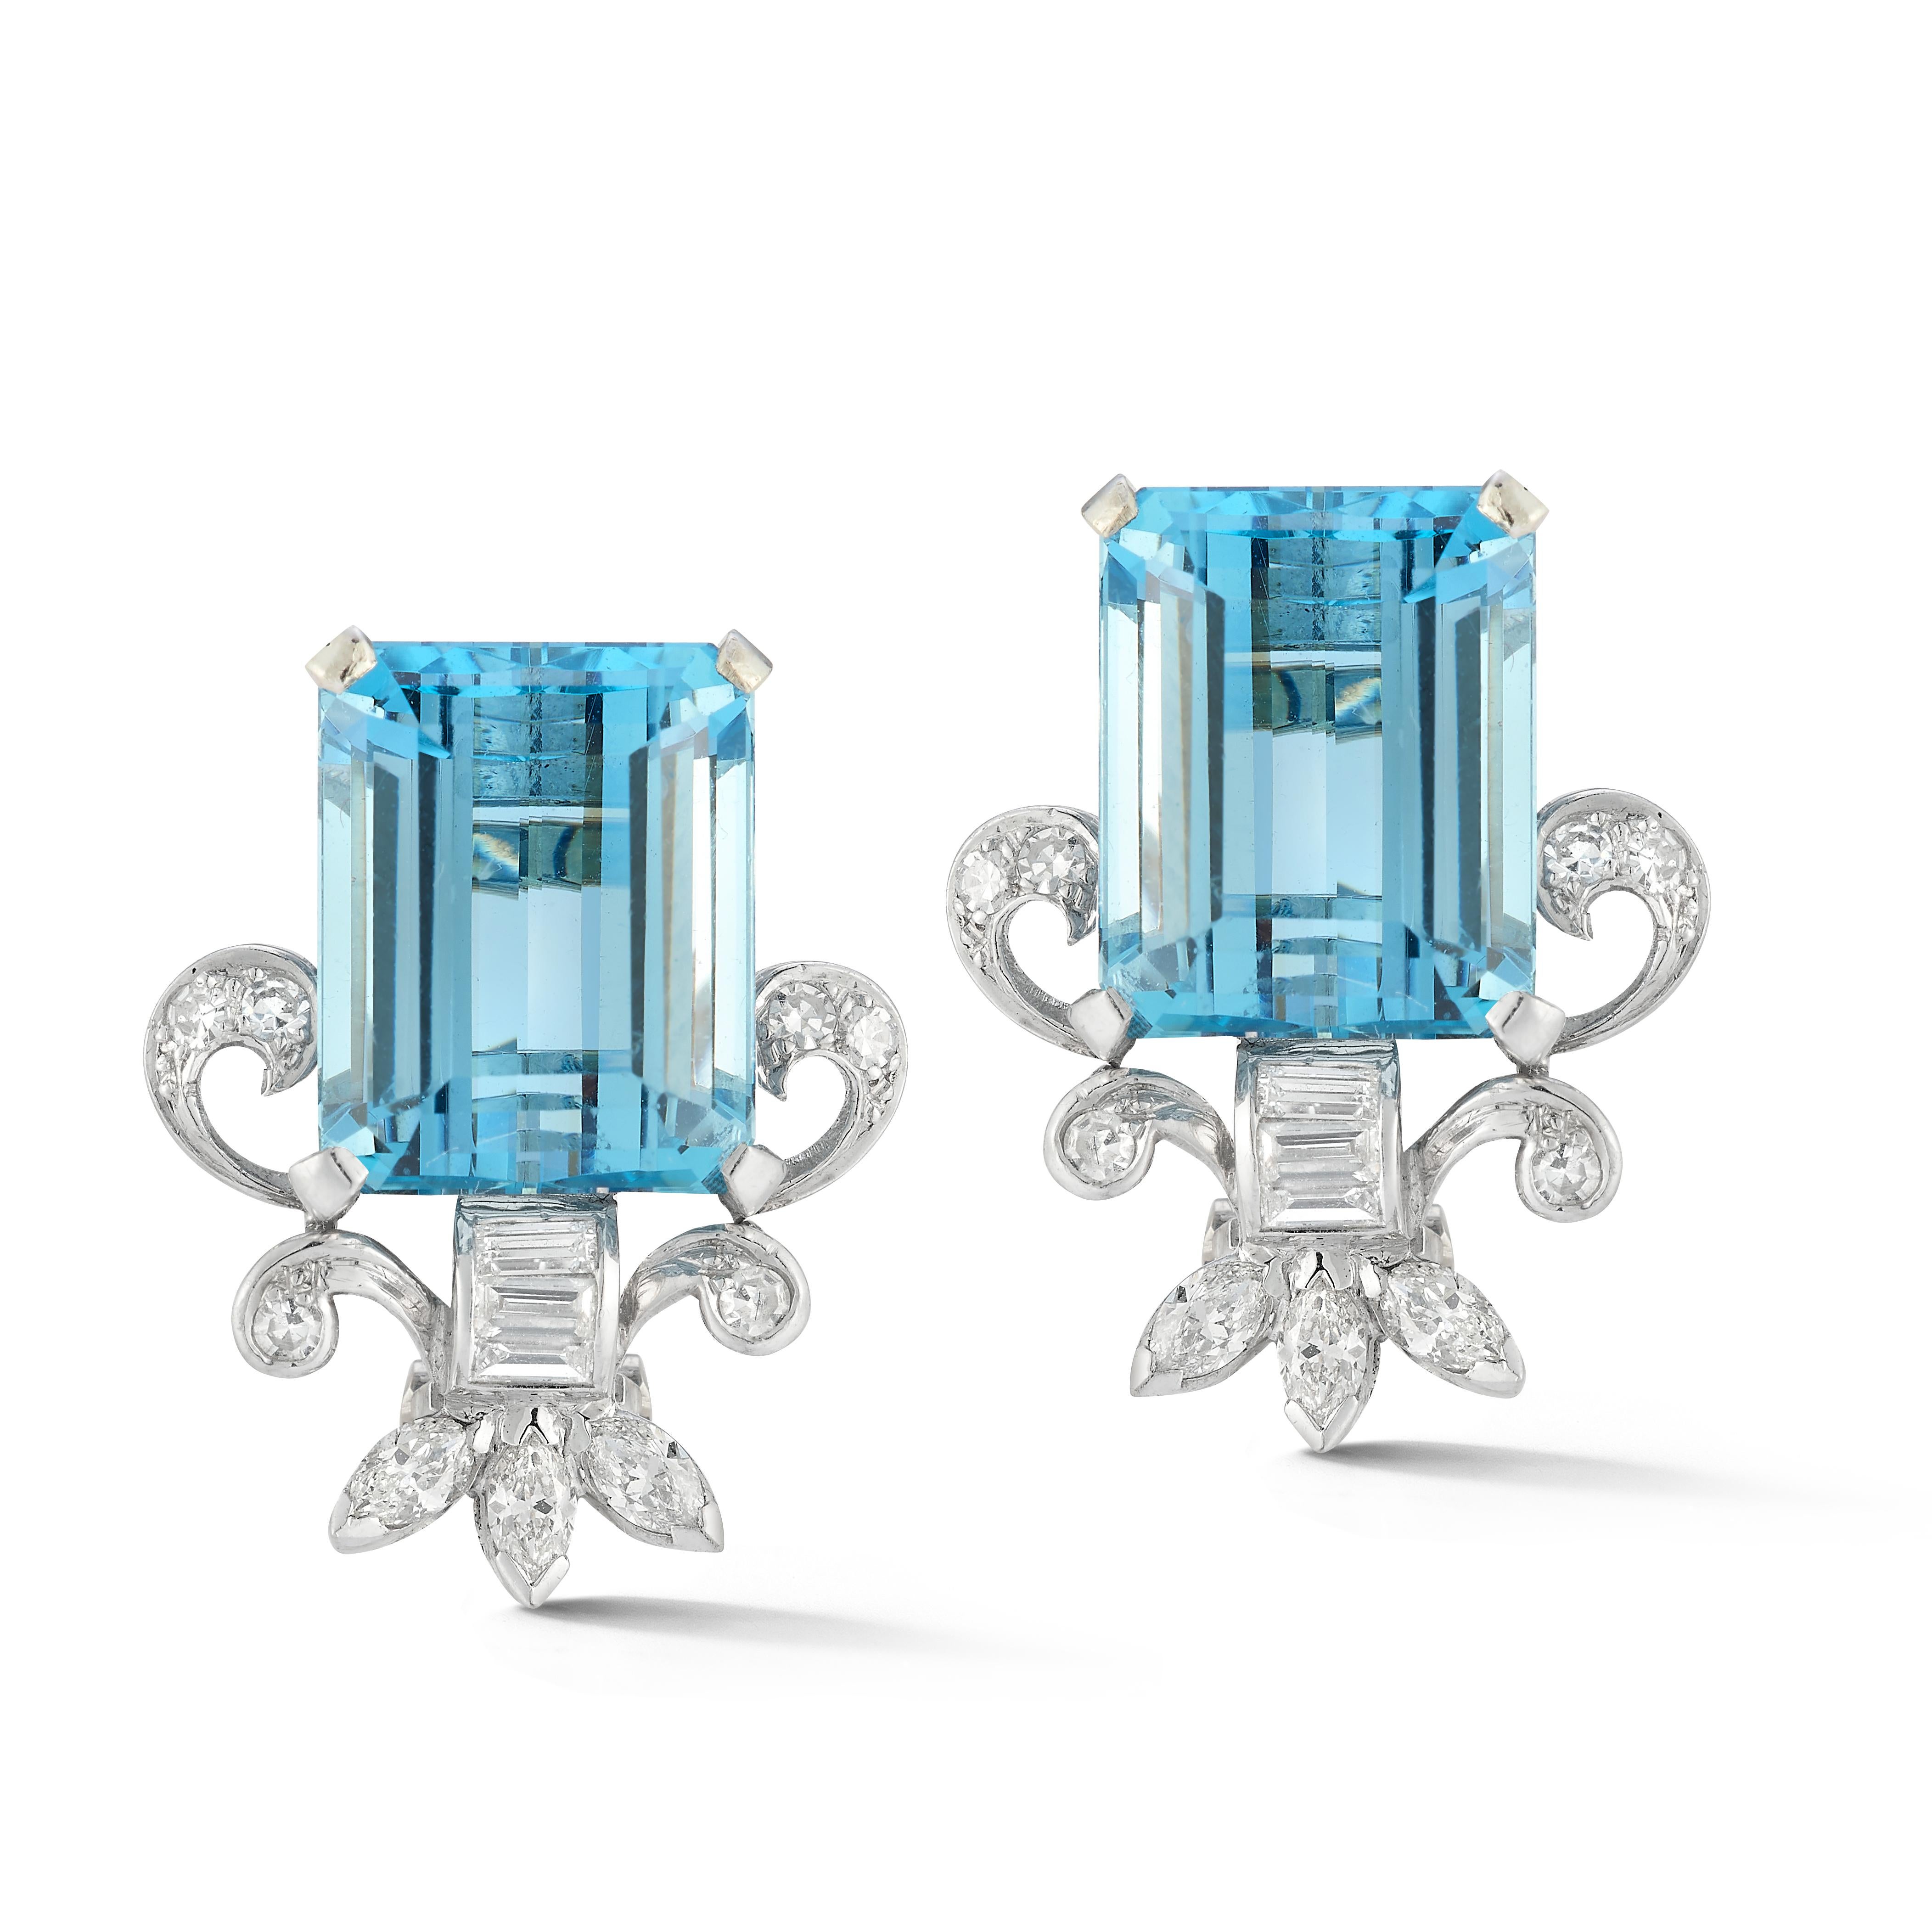 Aquamarine & Diamond Earrings

A pair of platinum earrings set with 2 emerald cut aquamarines and accented with marquise, baguette and round cut diamonds.

Aquamarine Weight: approximately 18.52 carats 
Diamond Weight: approximately 1.29